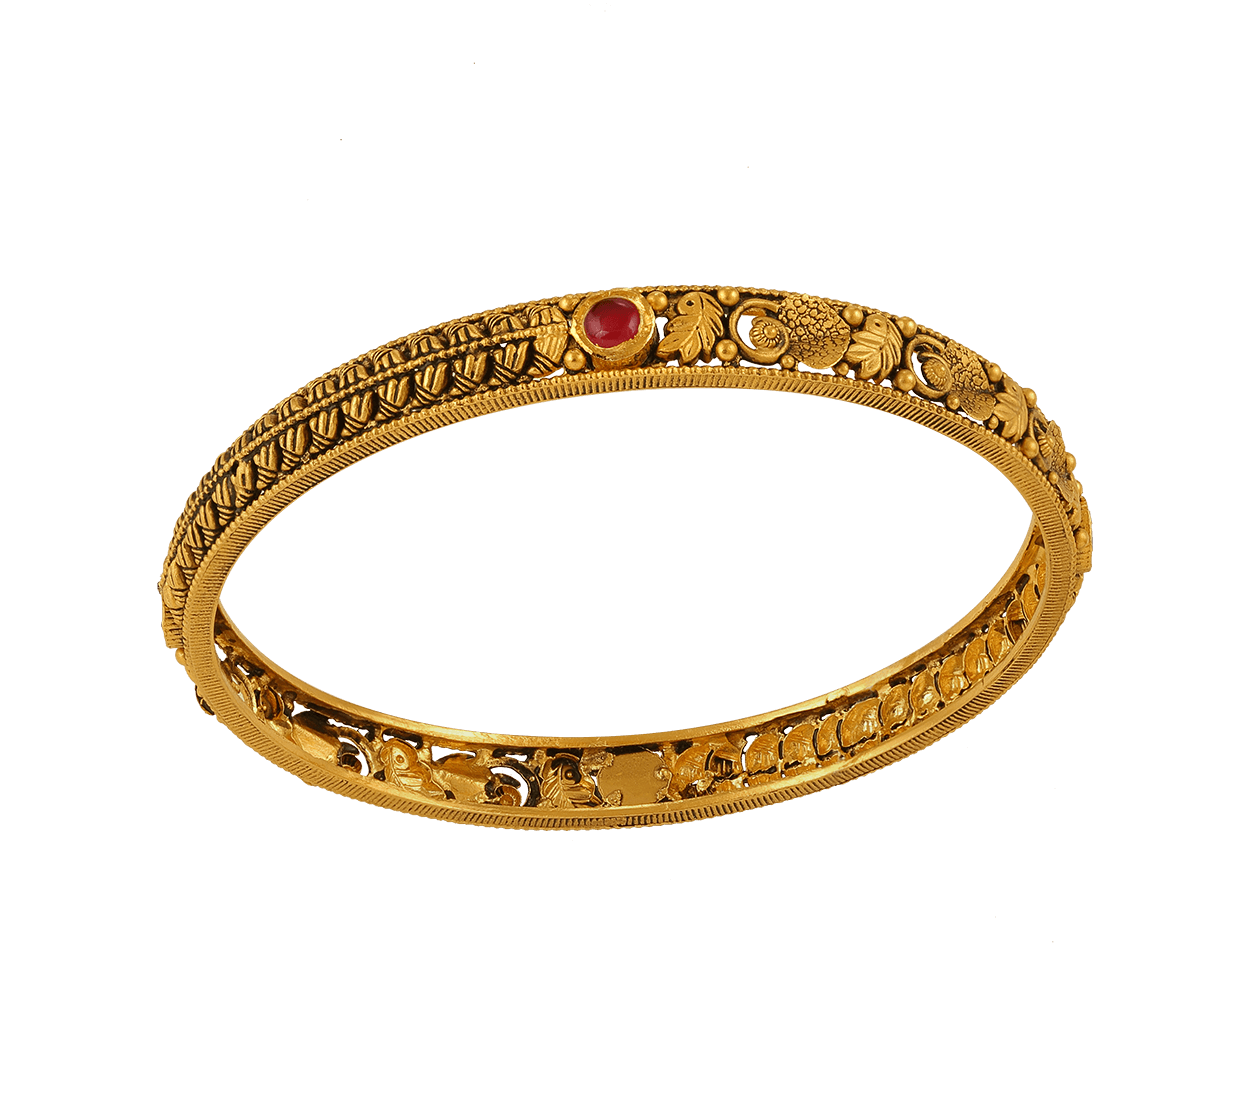 Beautiful Antique Bangles  South India Jewels  Gold bangles for women  Gold bangles design Bangles jewelry designs